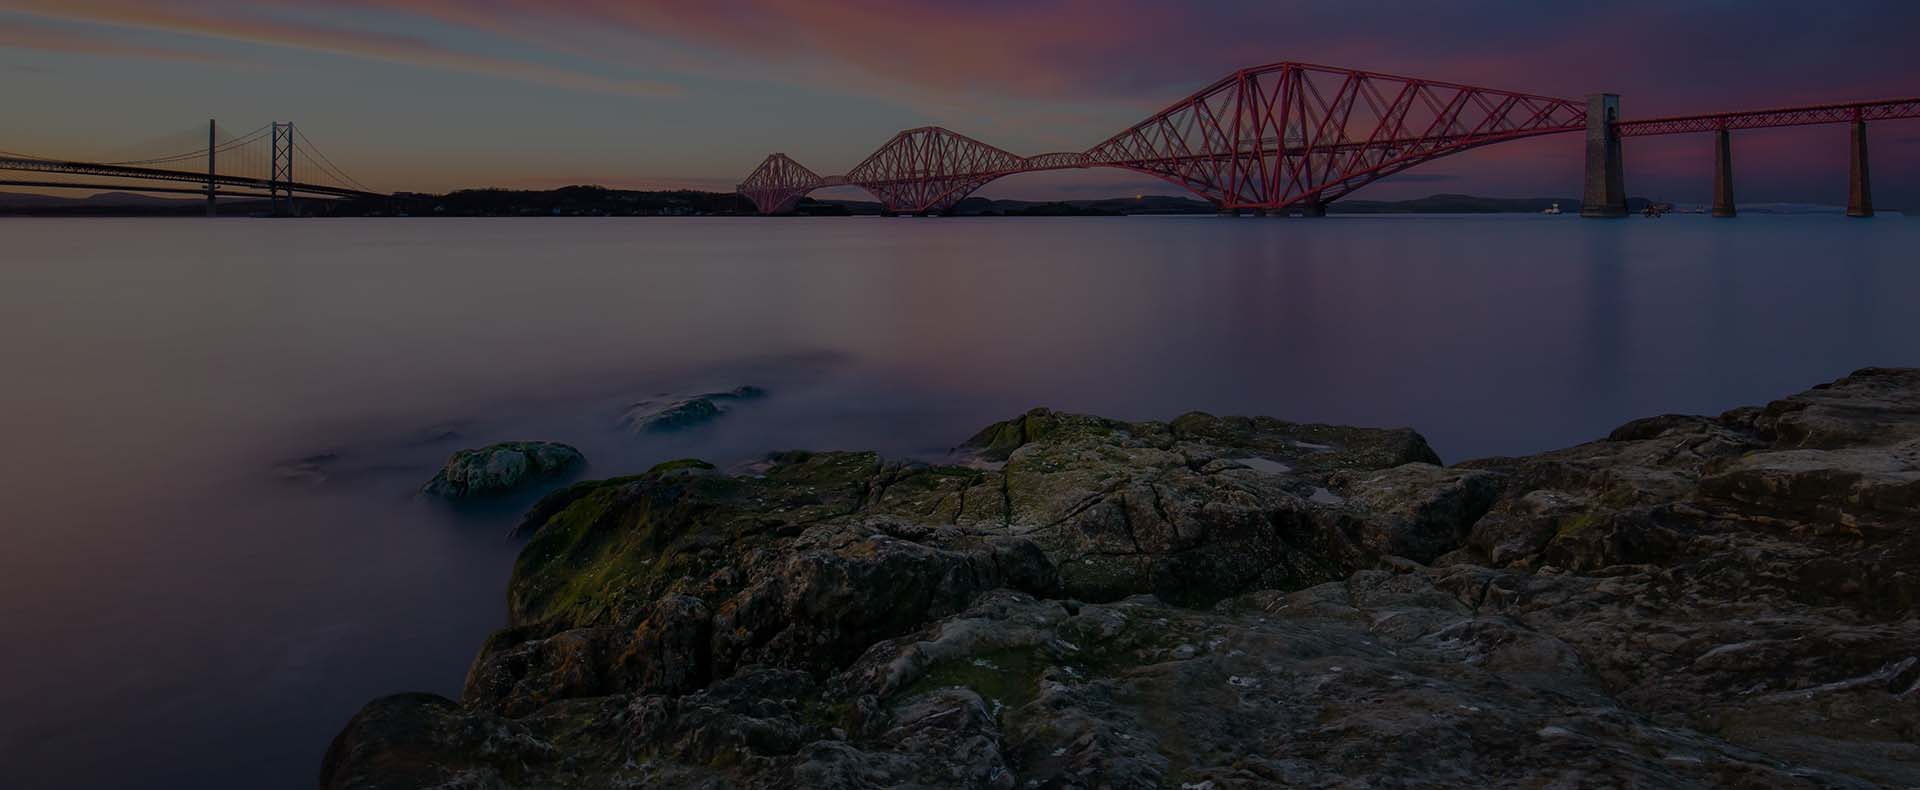 Forth bridge, a red railway bridge in Edinburgh with another bridge in the background and rocks and sea in the foreground